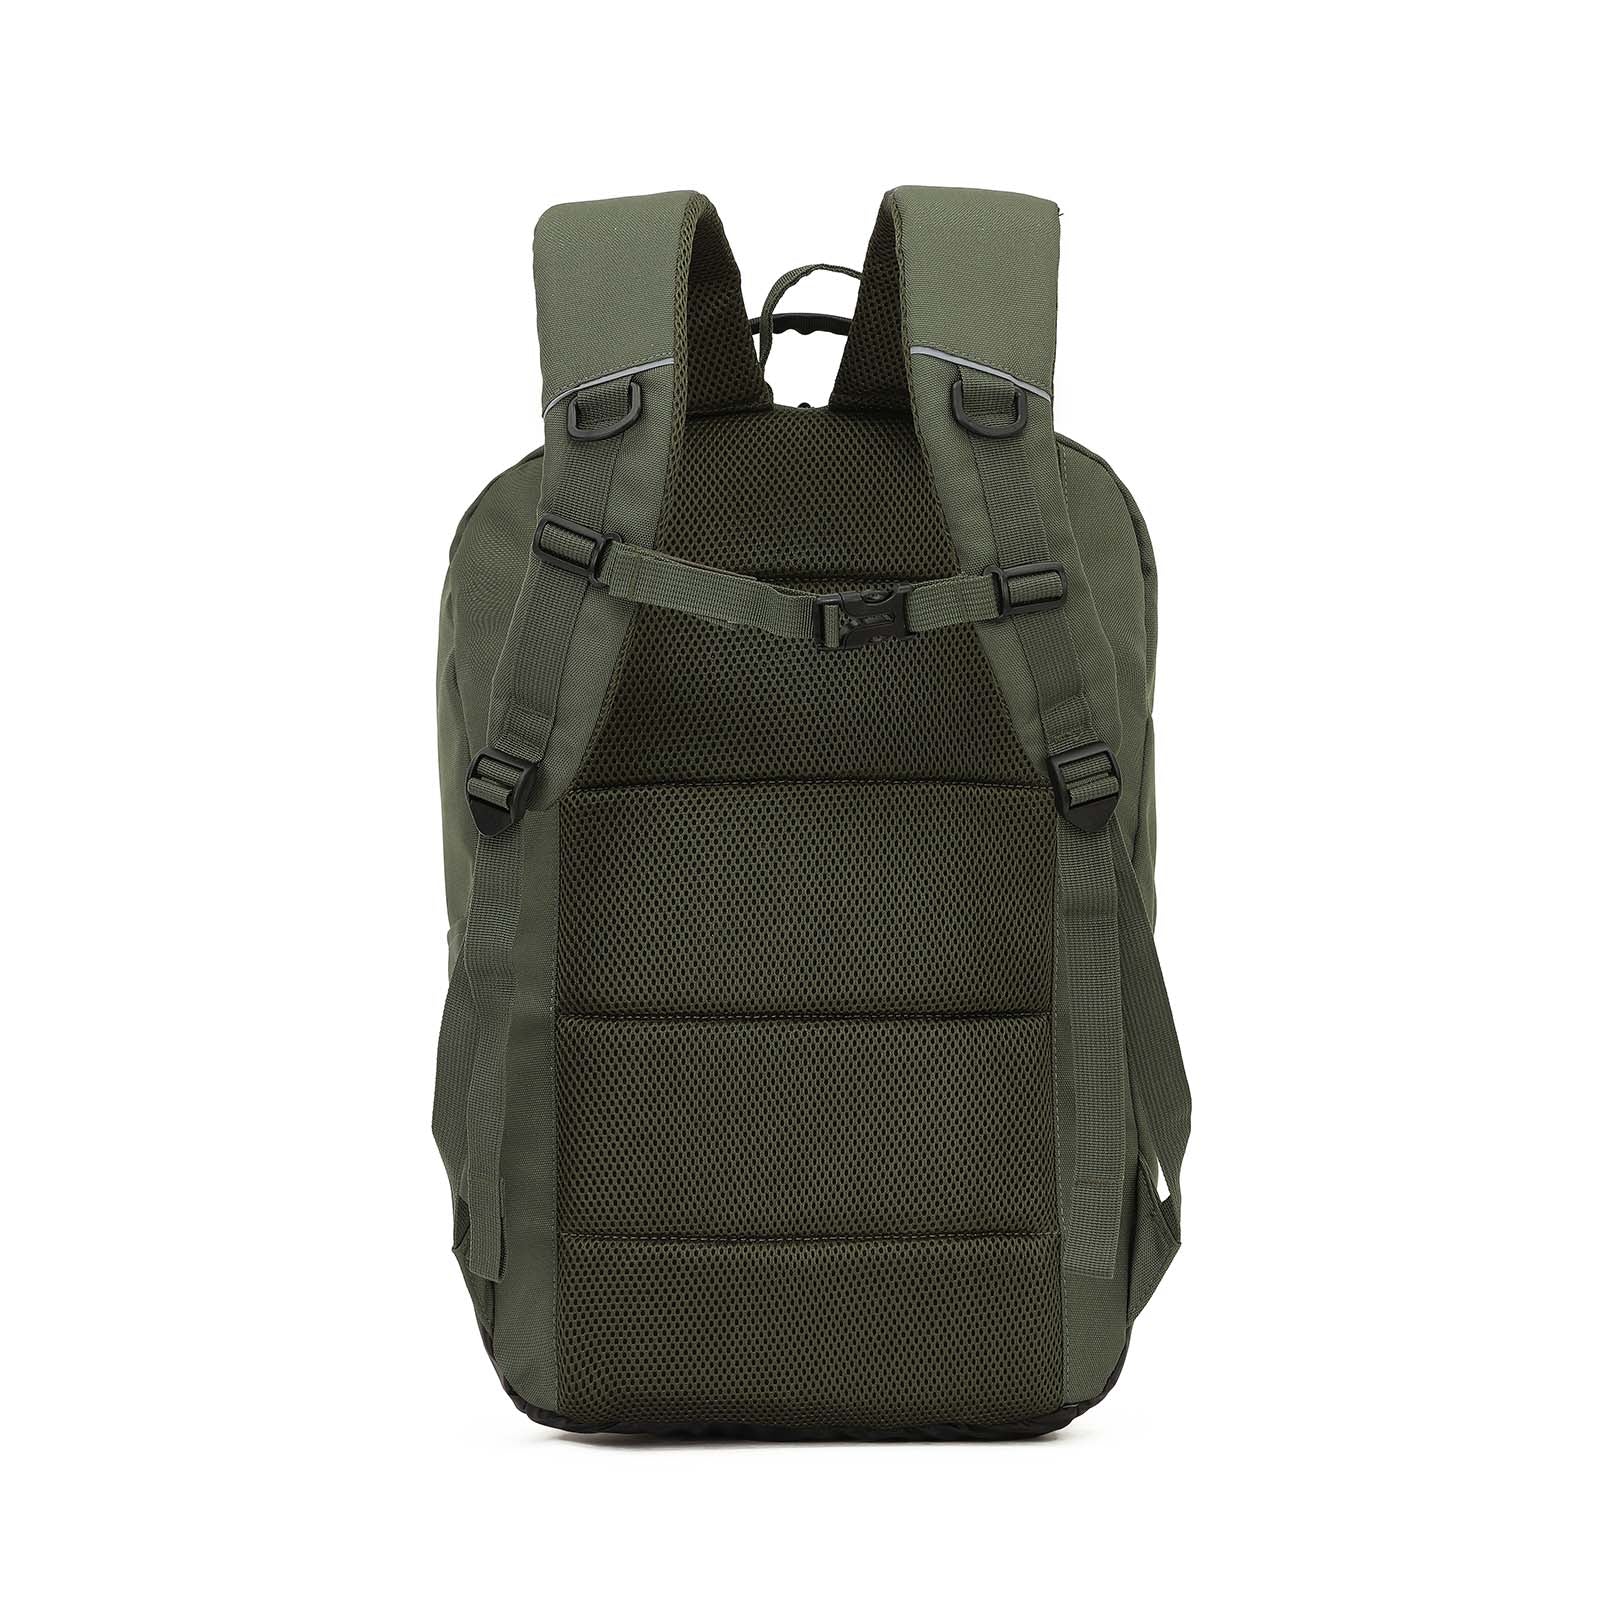 tosca-laptop-compartment-backpack-35l-khaki-front